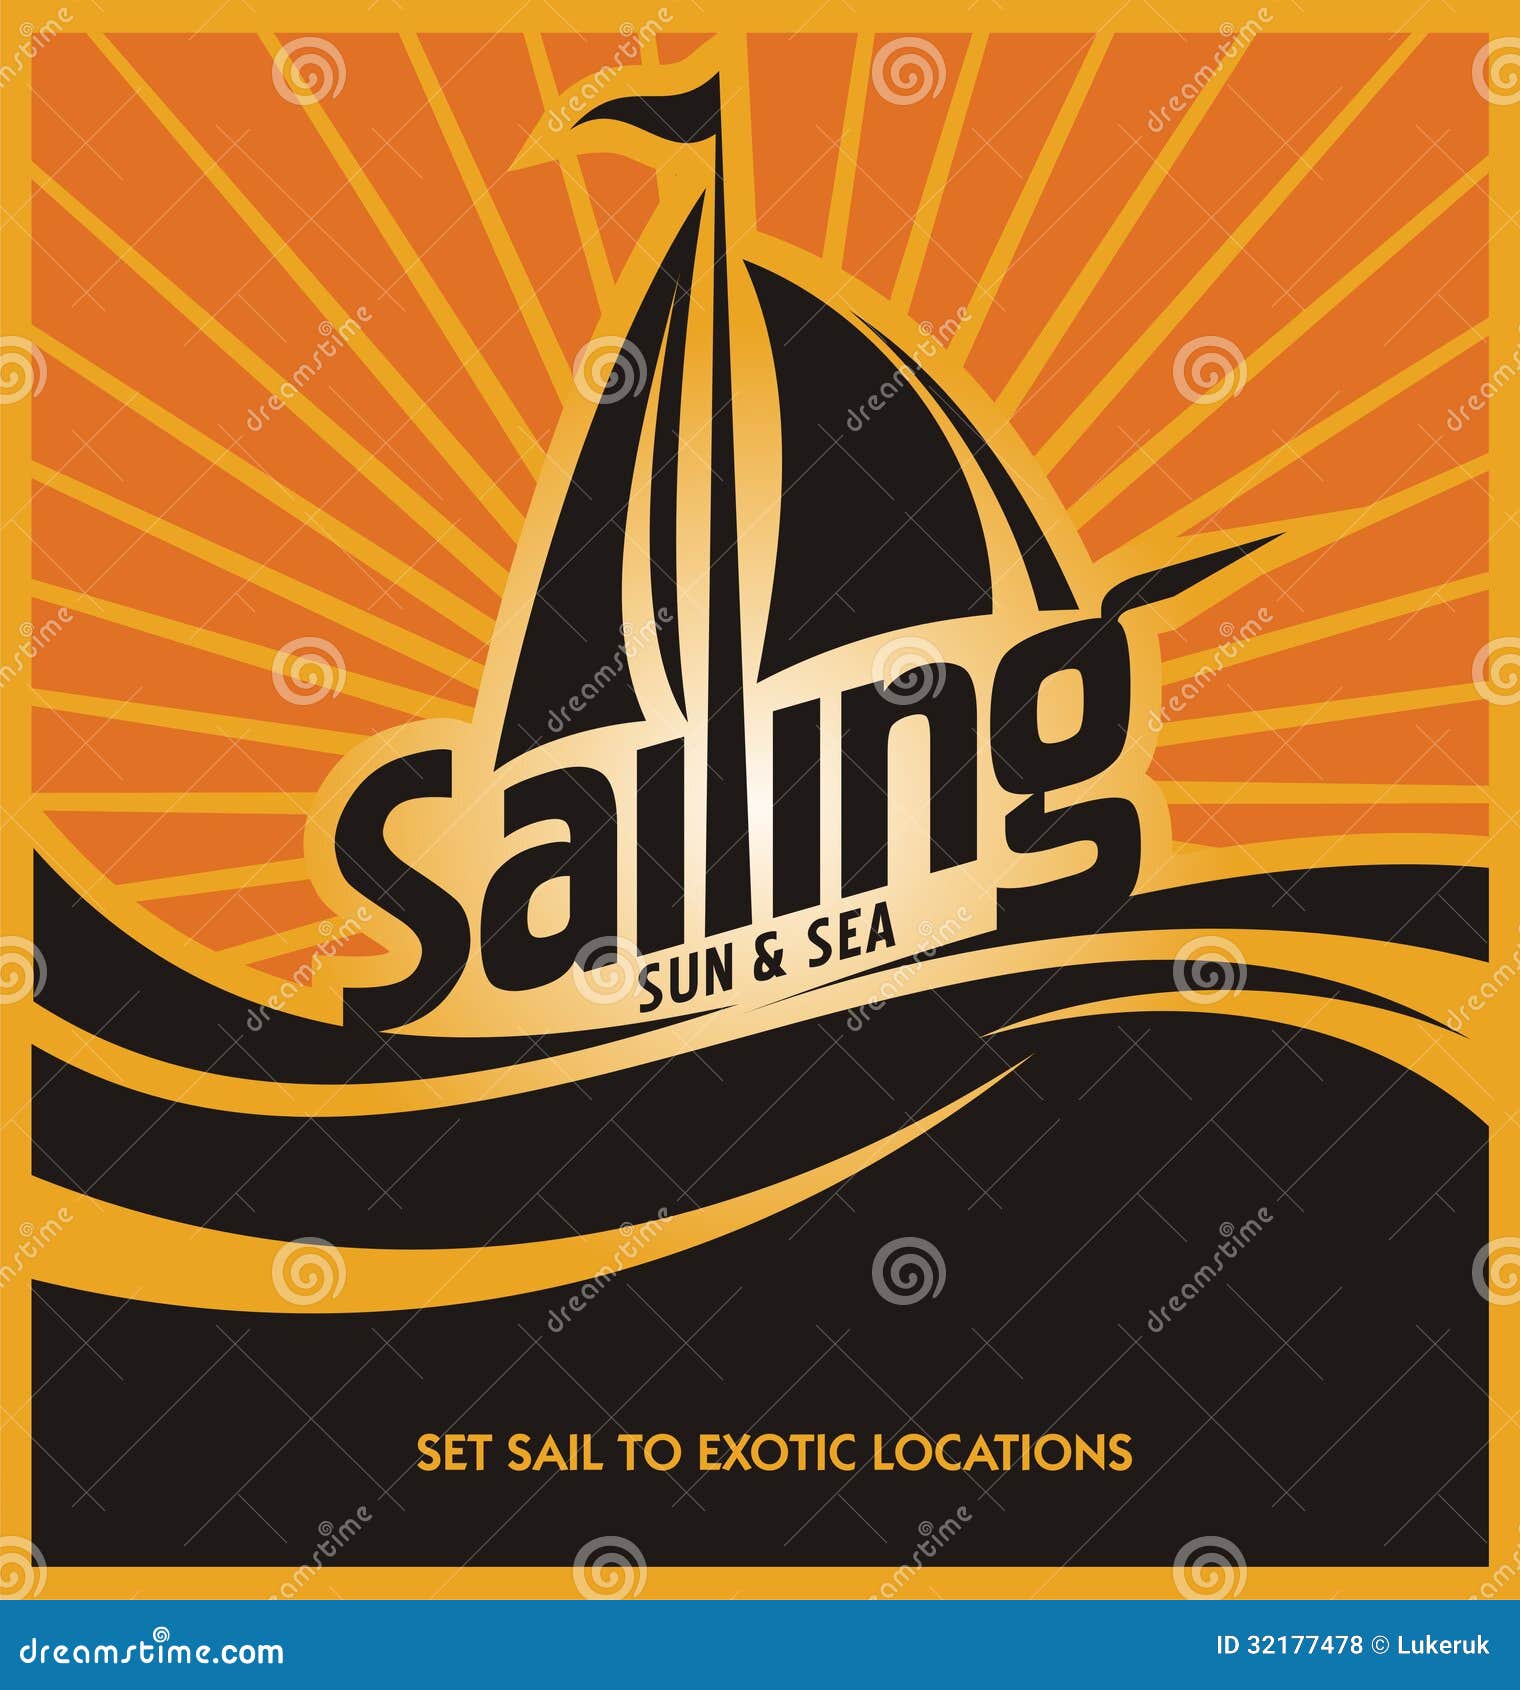 Sailing poster design template. Abstract background with sailboat, sea 